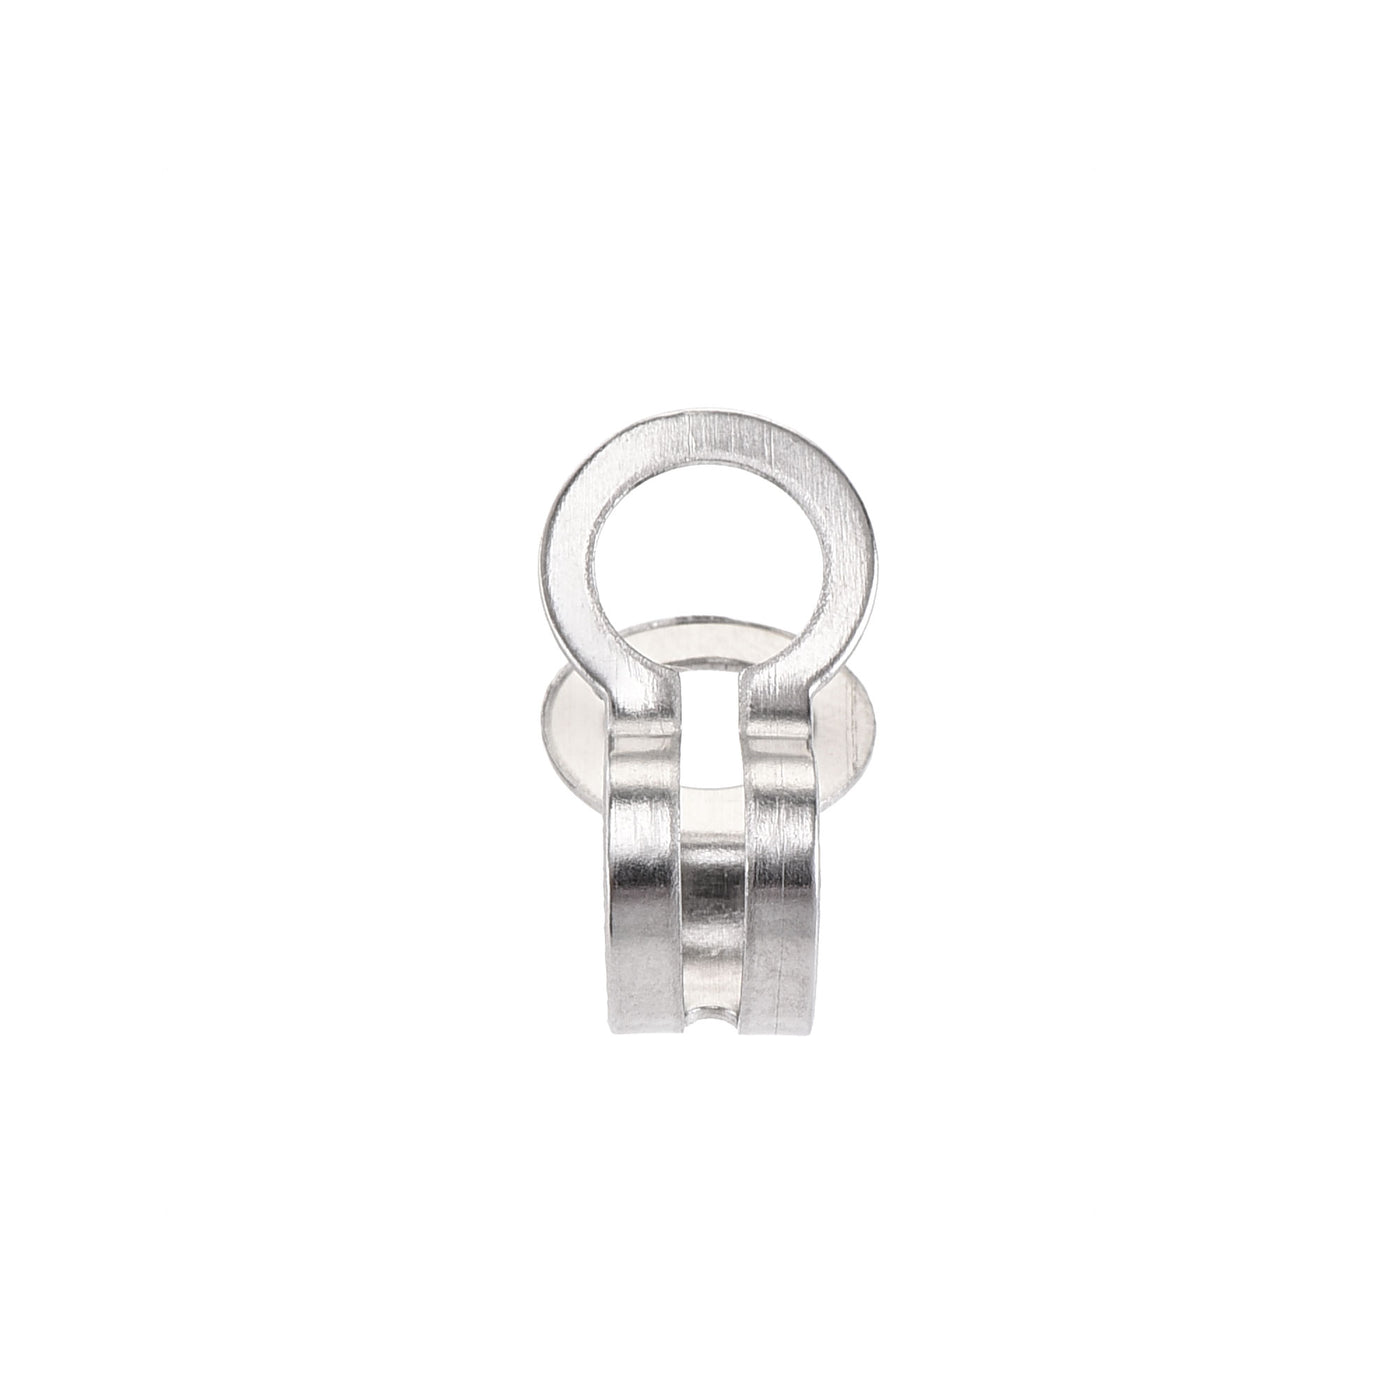 Uxcell Uxcell Ball Chain Connector, 5mm Double Ring Style Link Stainless Steel Loop Connection, Pack of 30